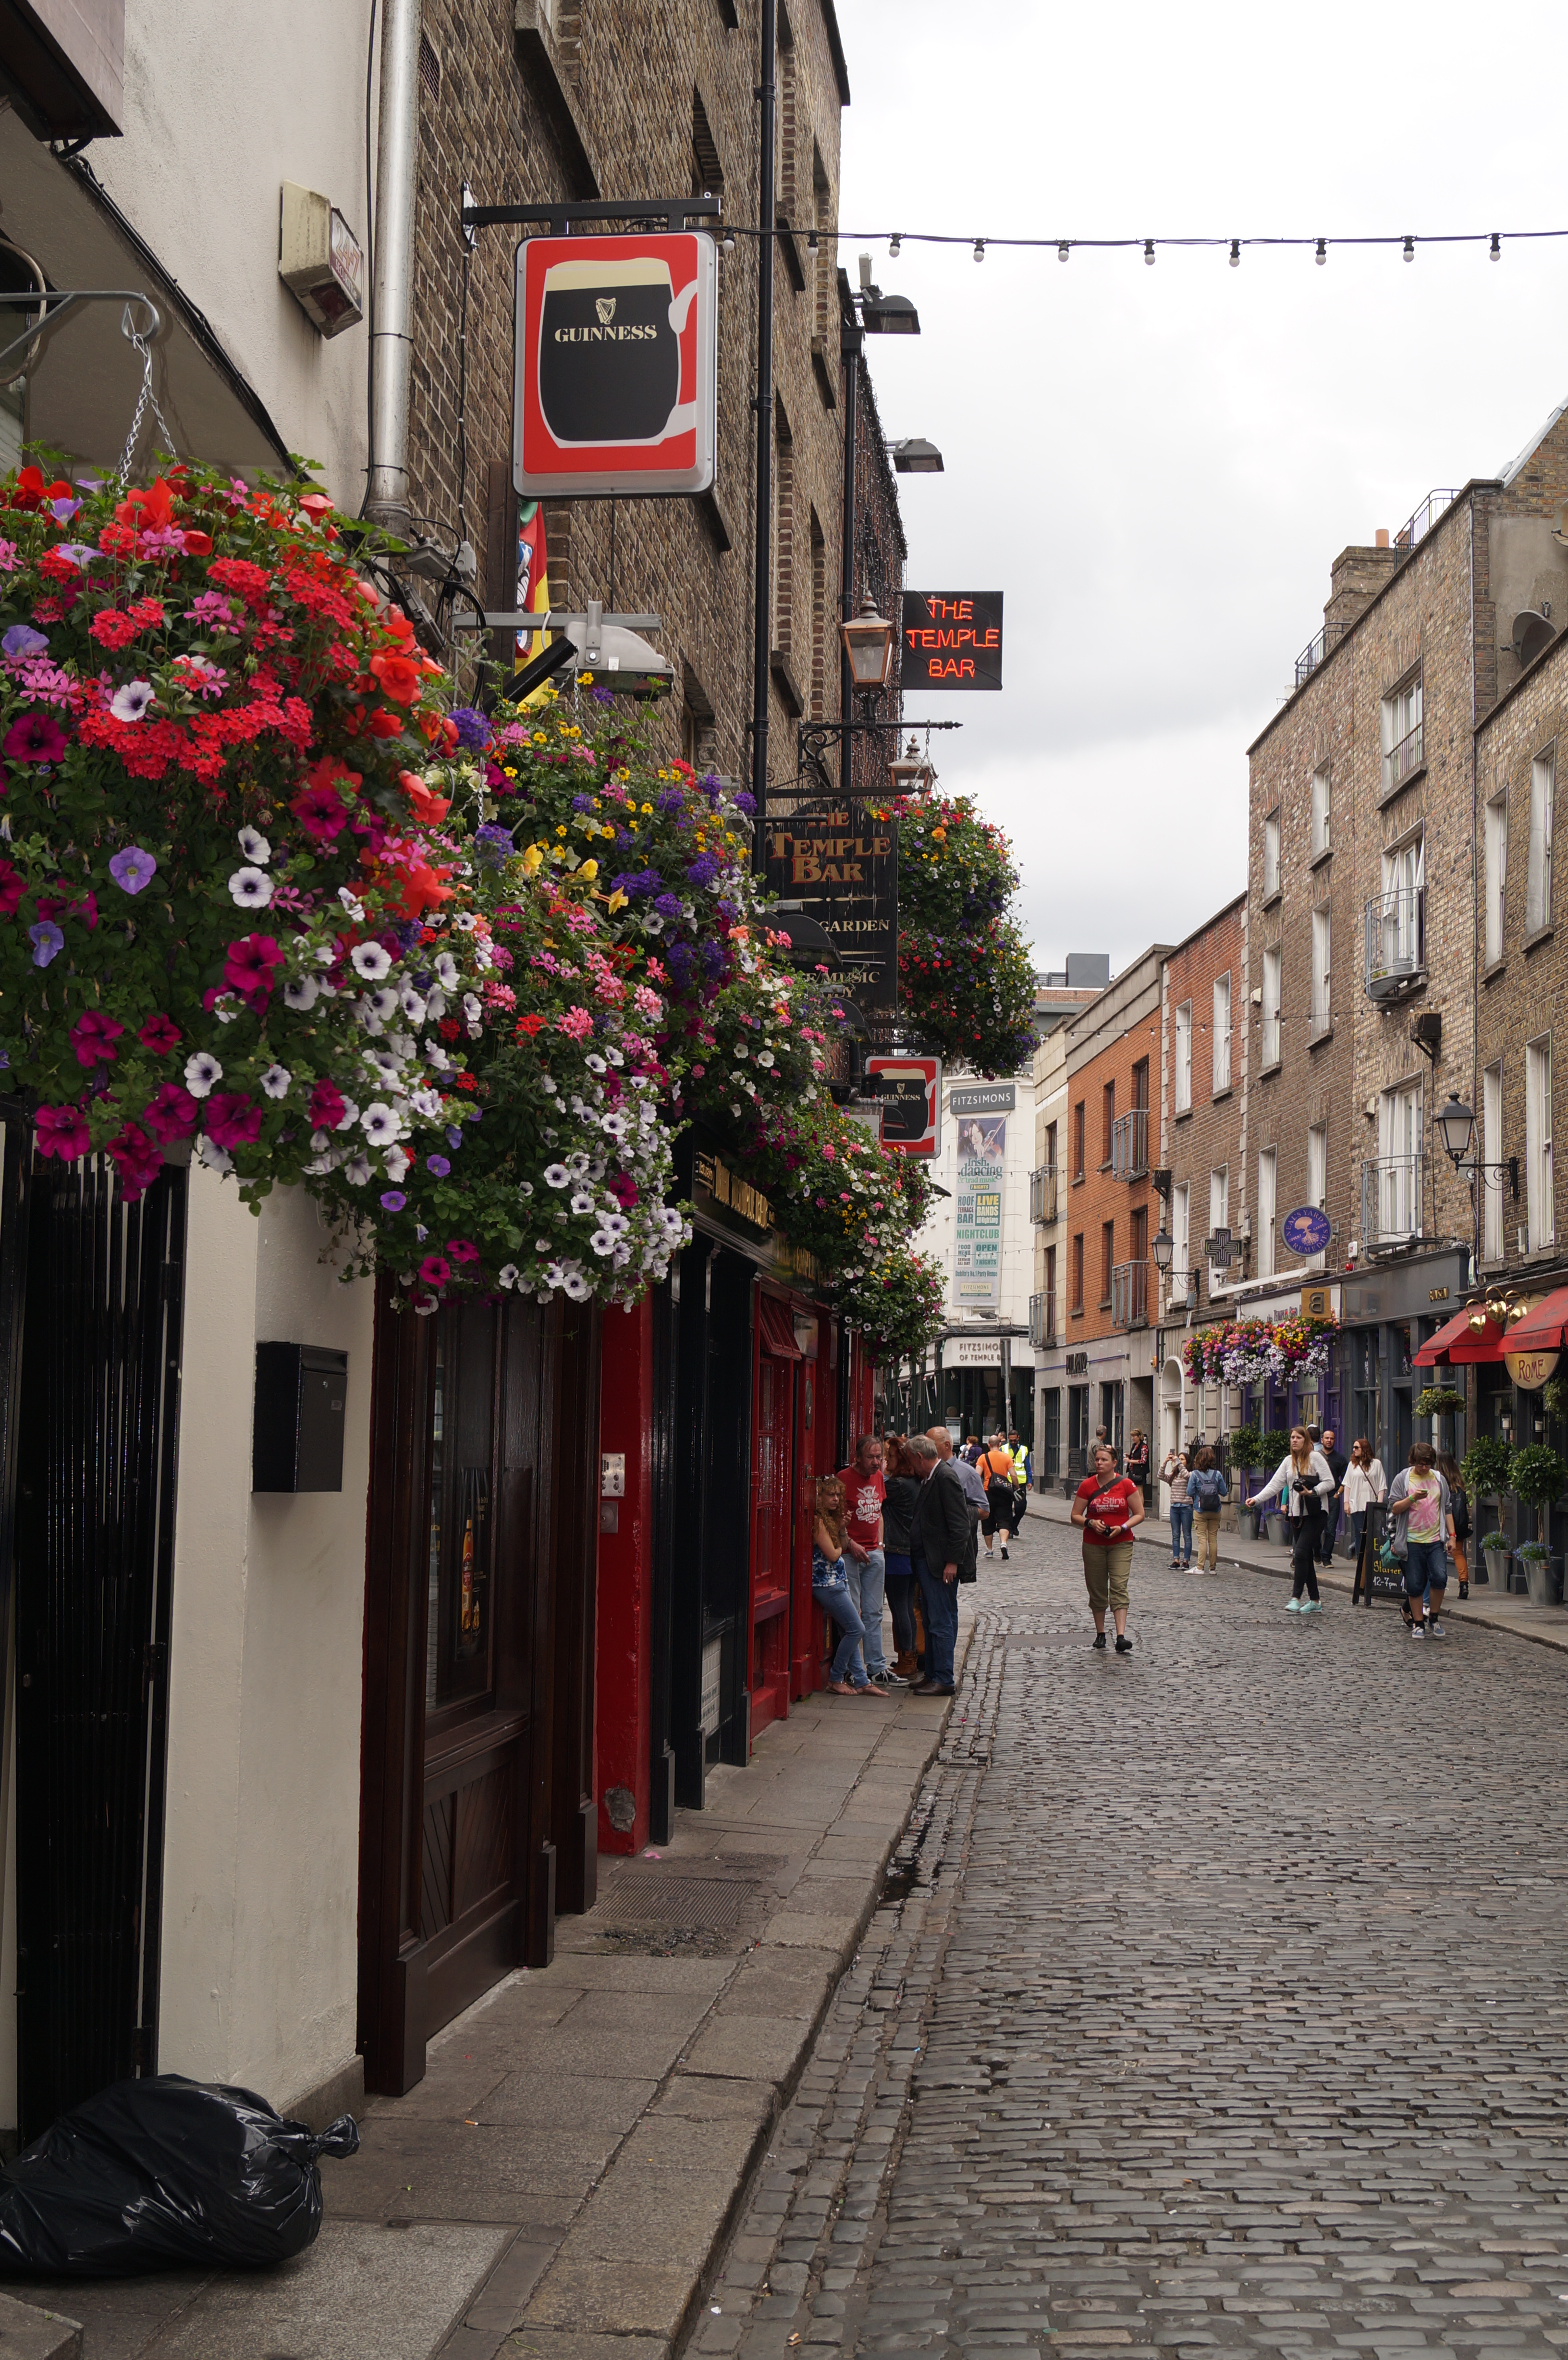 Dublin’s History and Architecture Charm Visitors